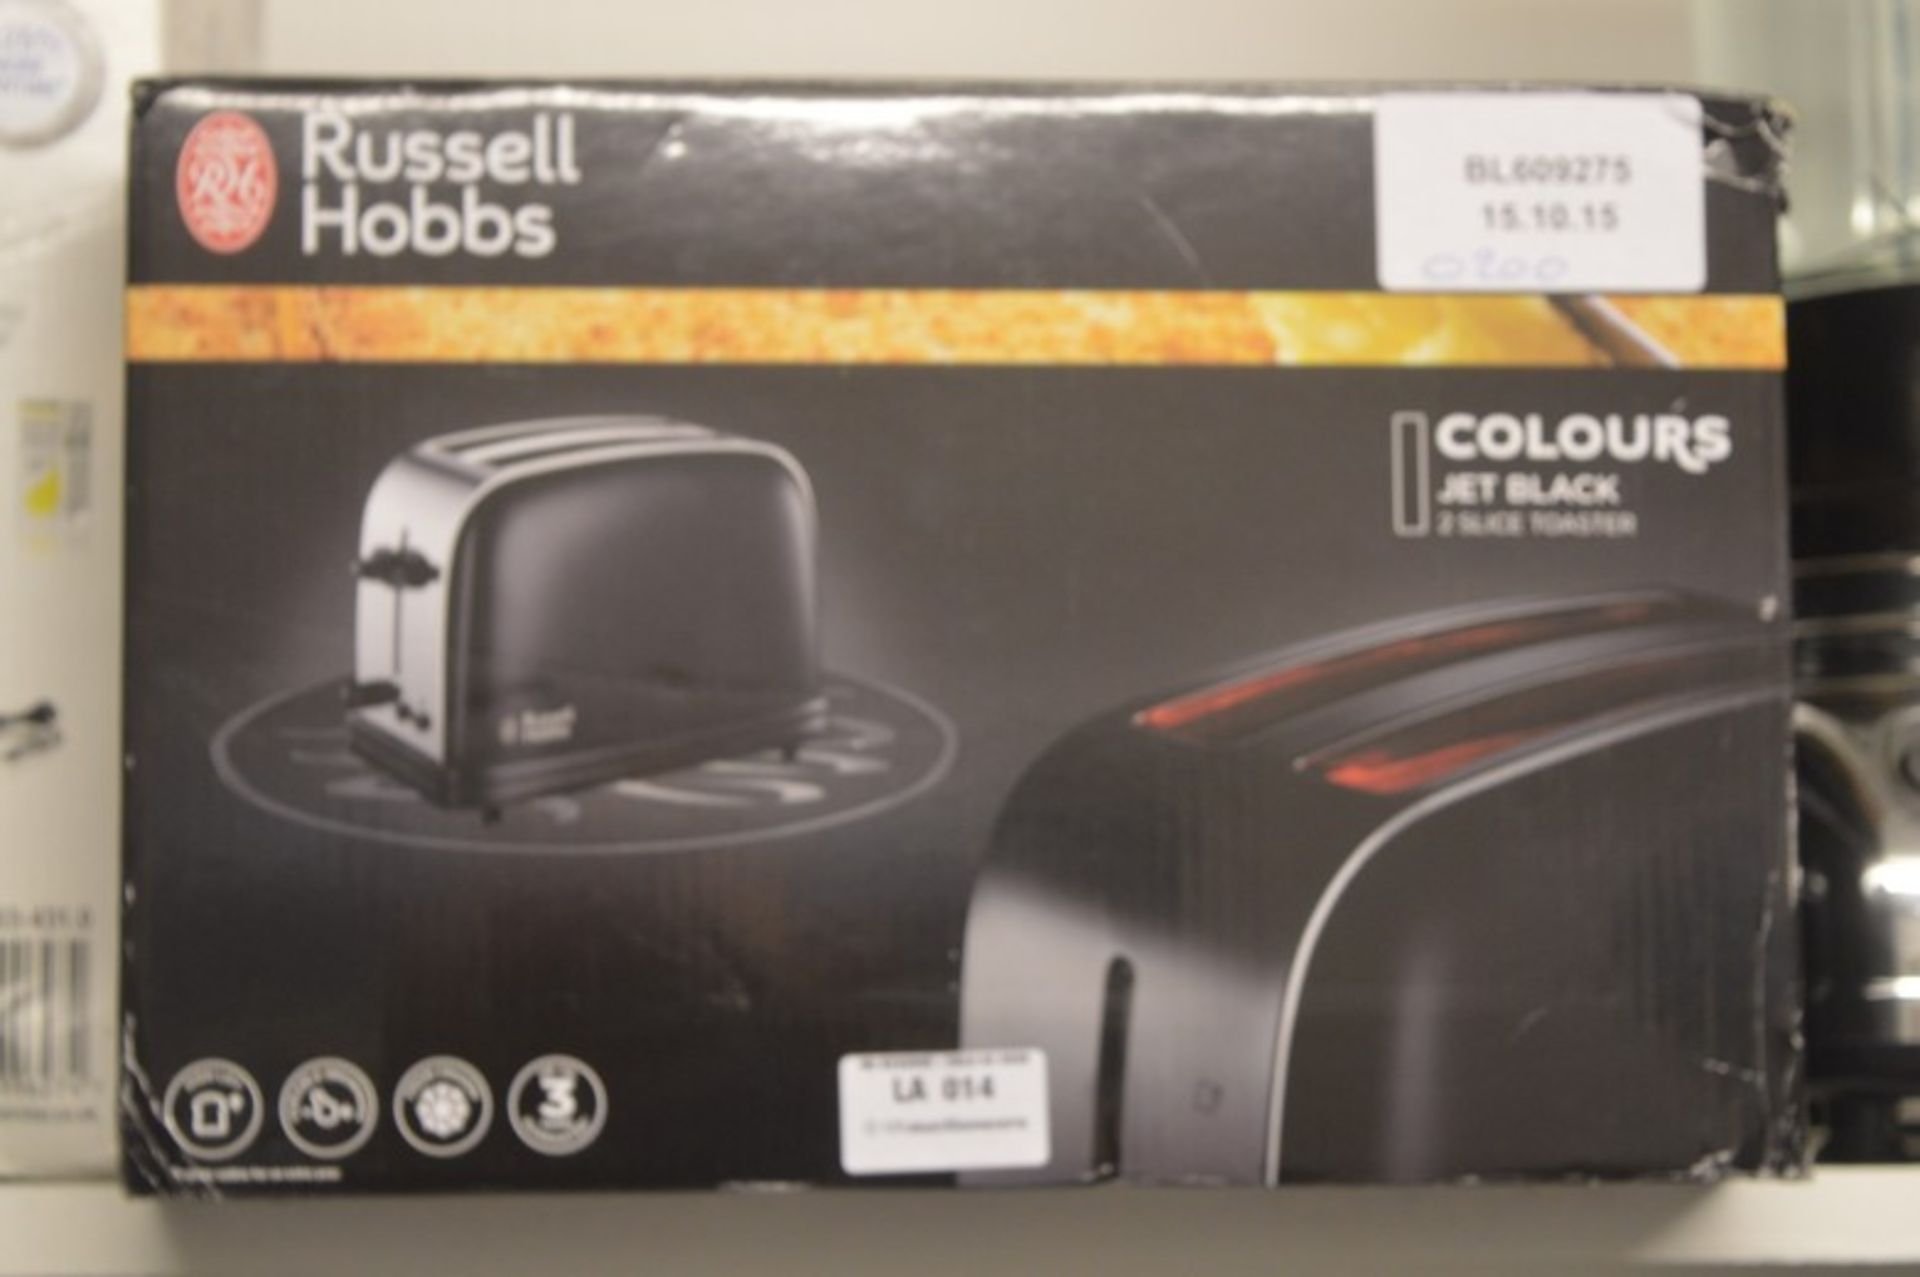 BOXED RUSSELL HOBBS 2 SLICE TOASTER RRP £20.00 15/10/15